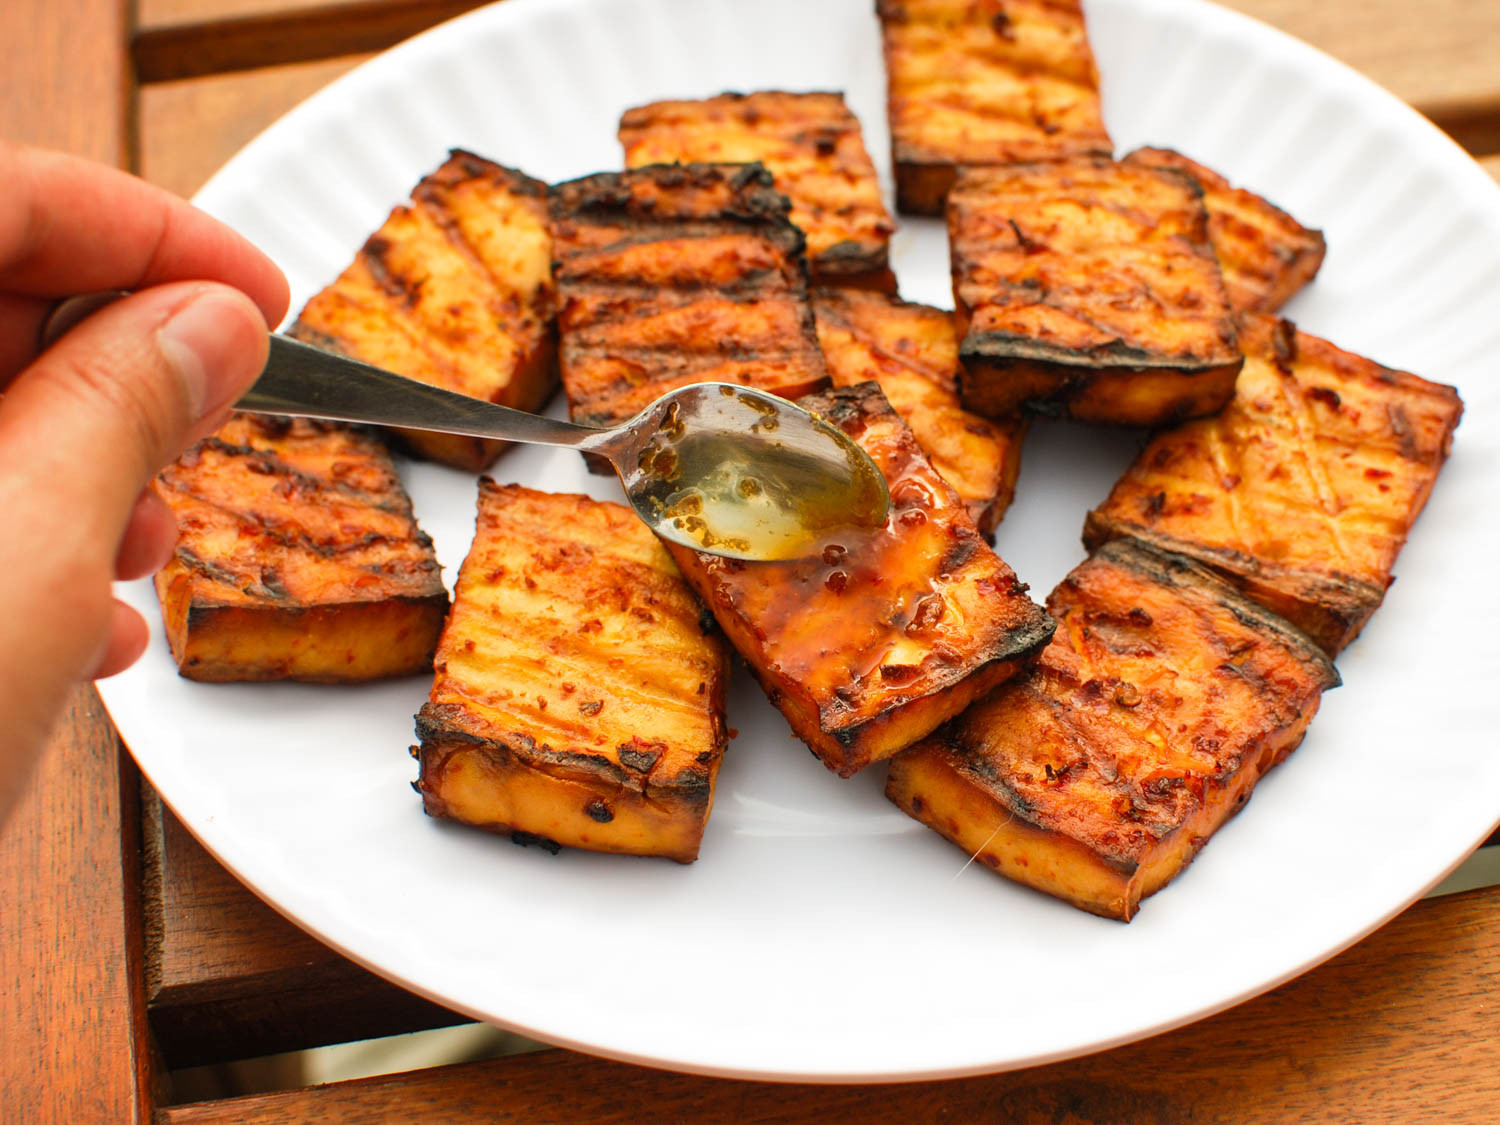 Grilled Tofu Recipes
 Grilled Tofu With Chipotle Miso Sauce Recipe